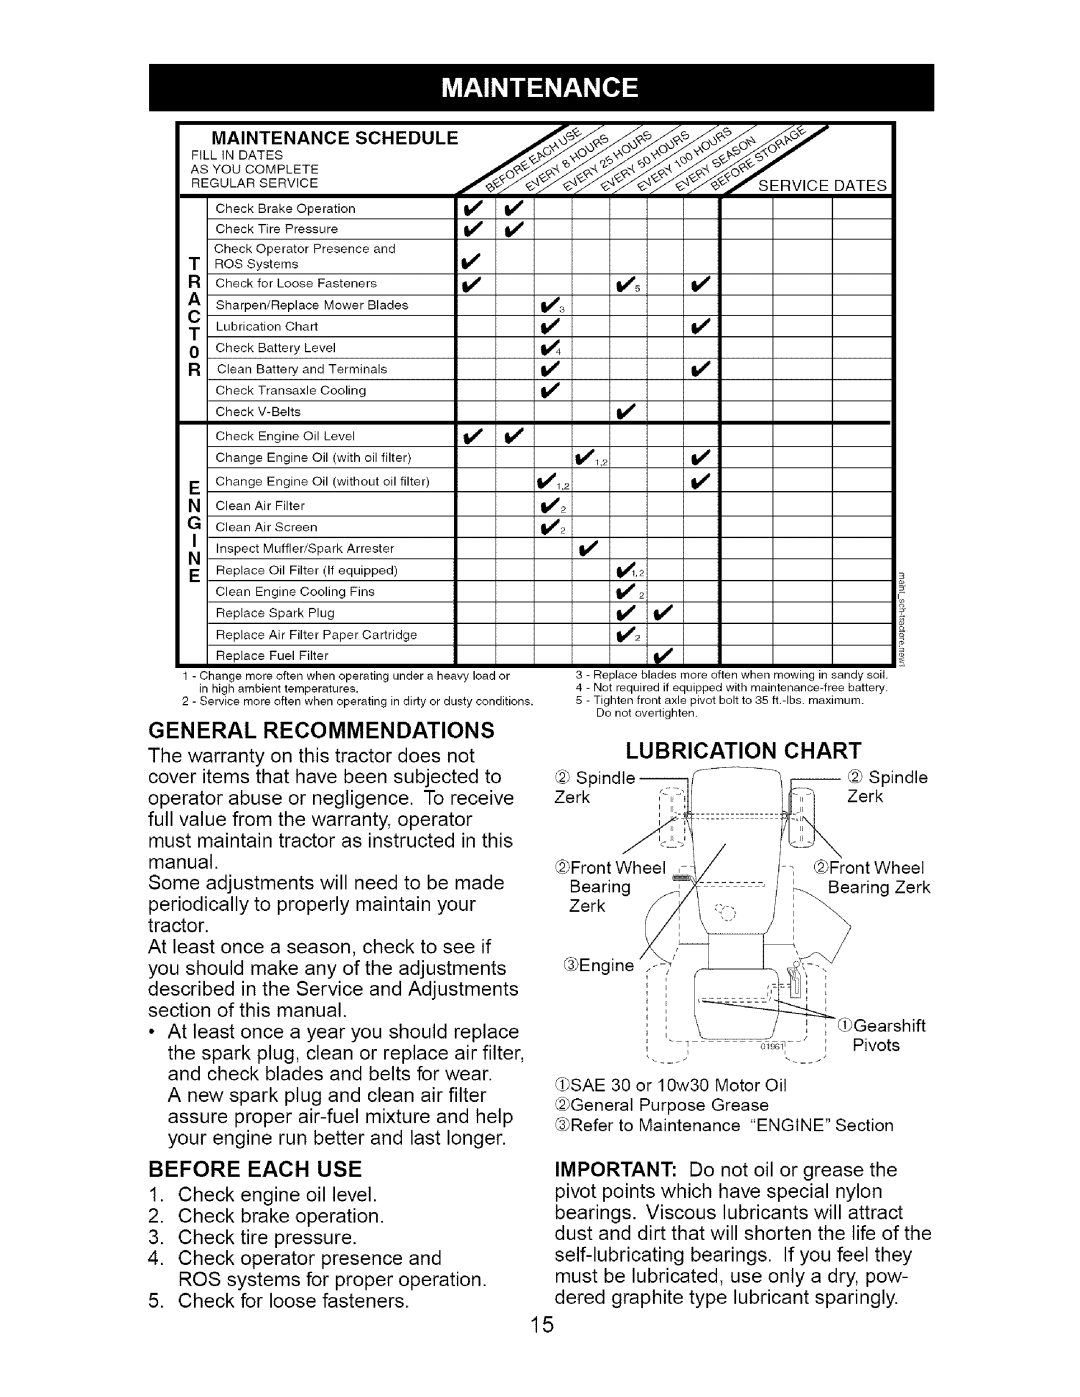 Craftsman 917.275632 manual F,L,Oat, Before Each Use, Lubrication, Chart, General Recommendations 